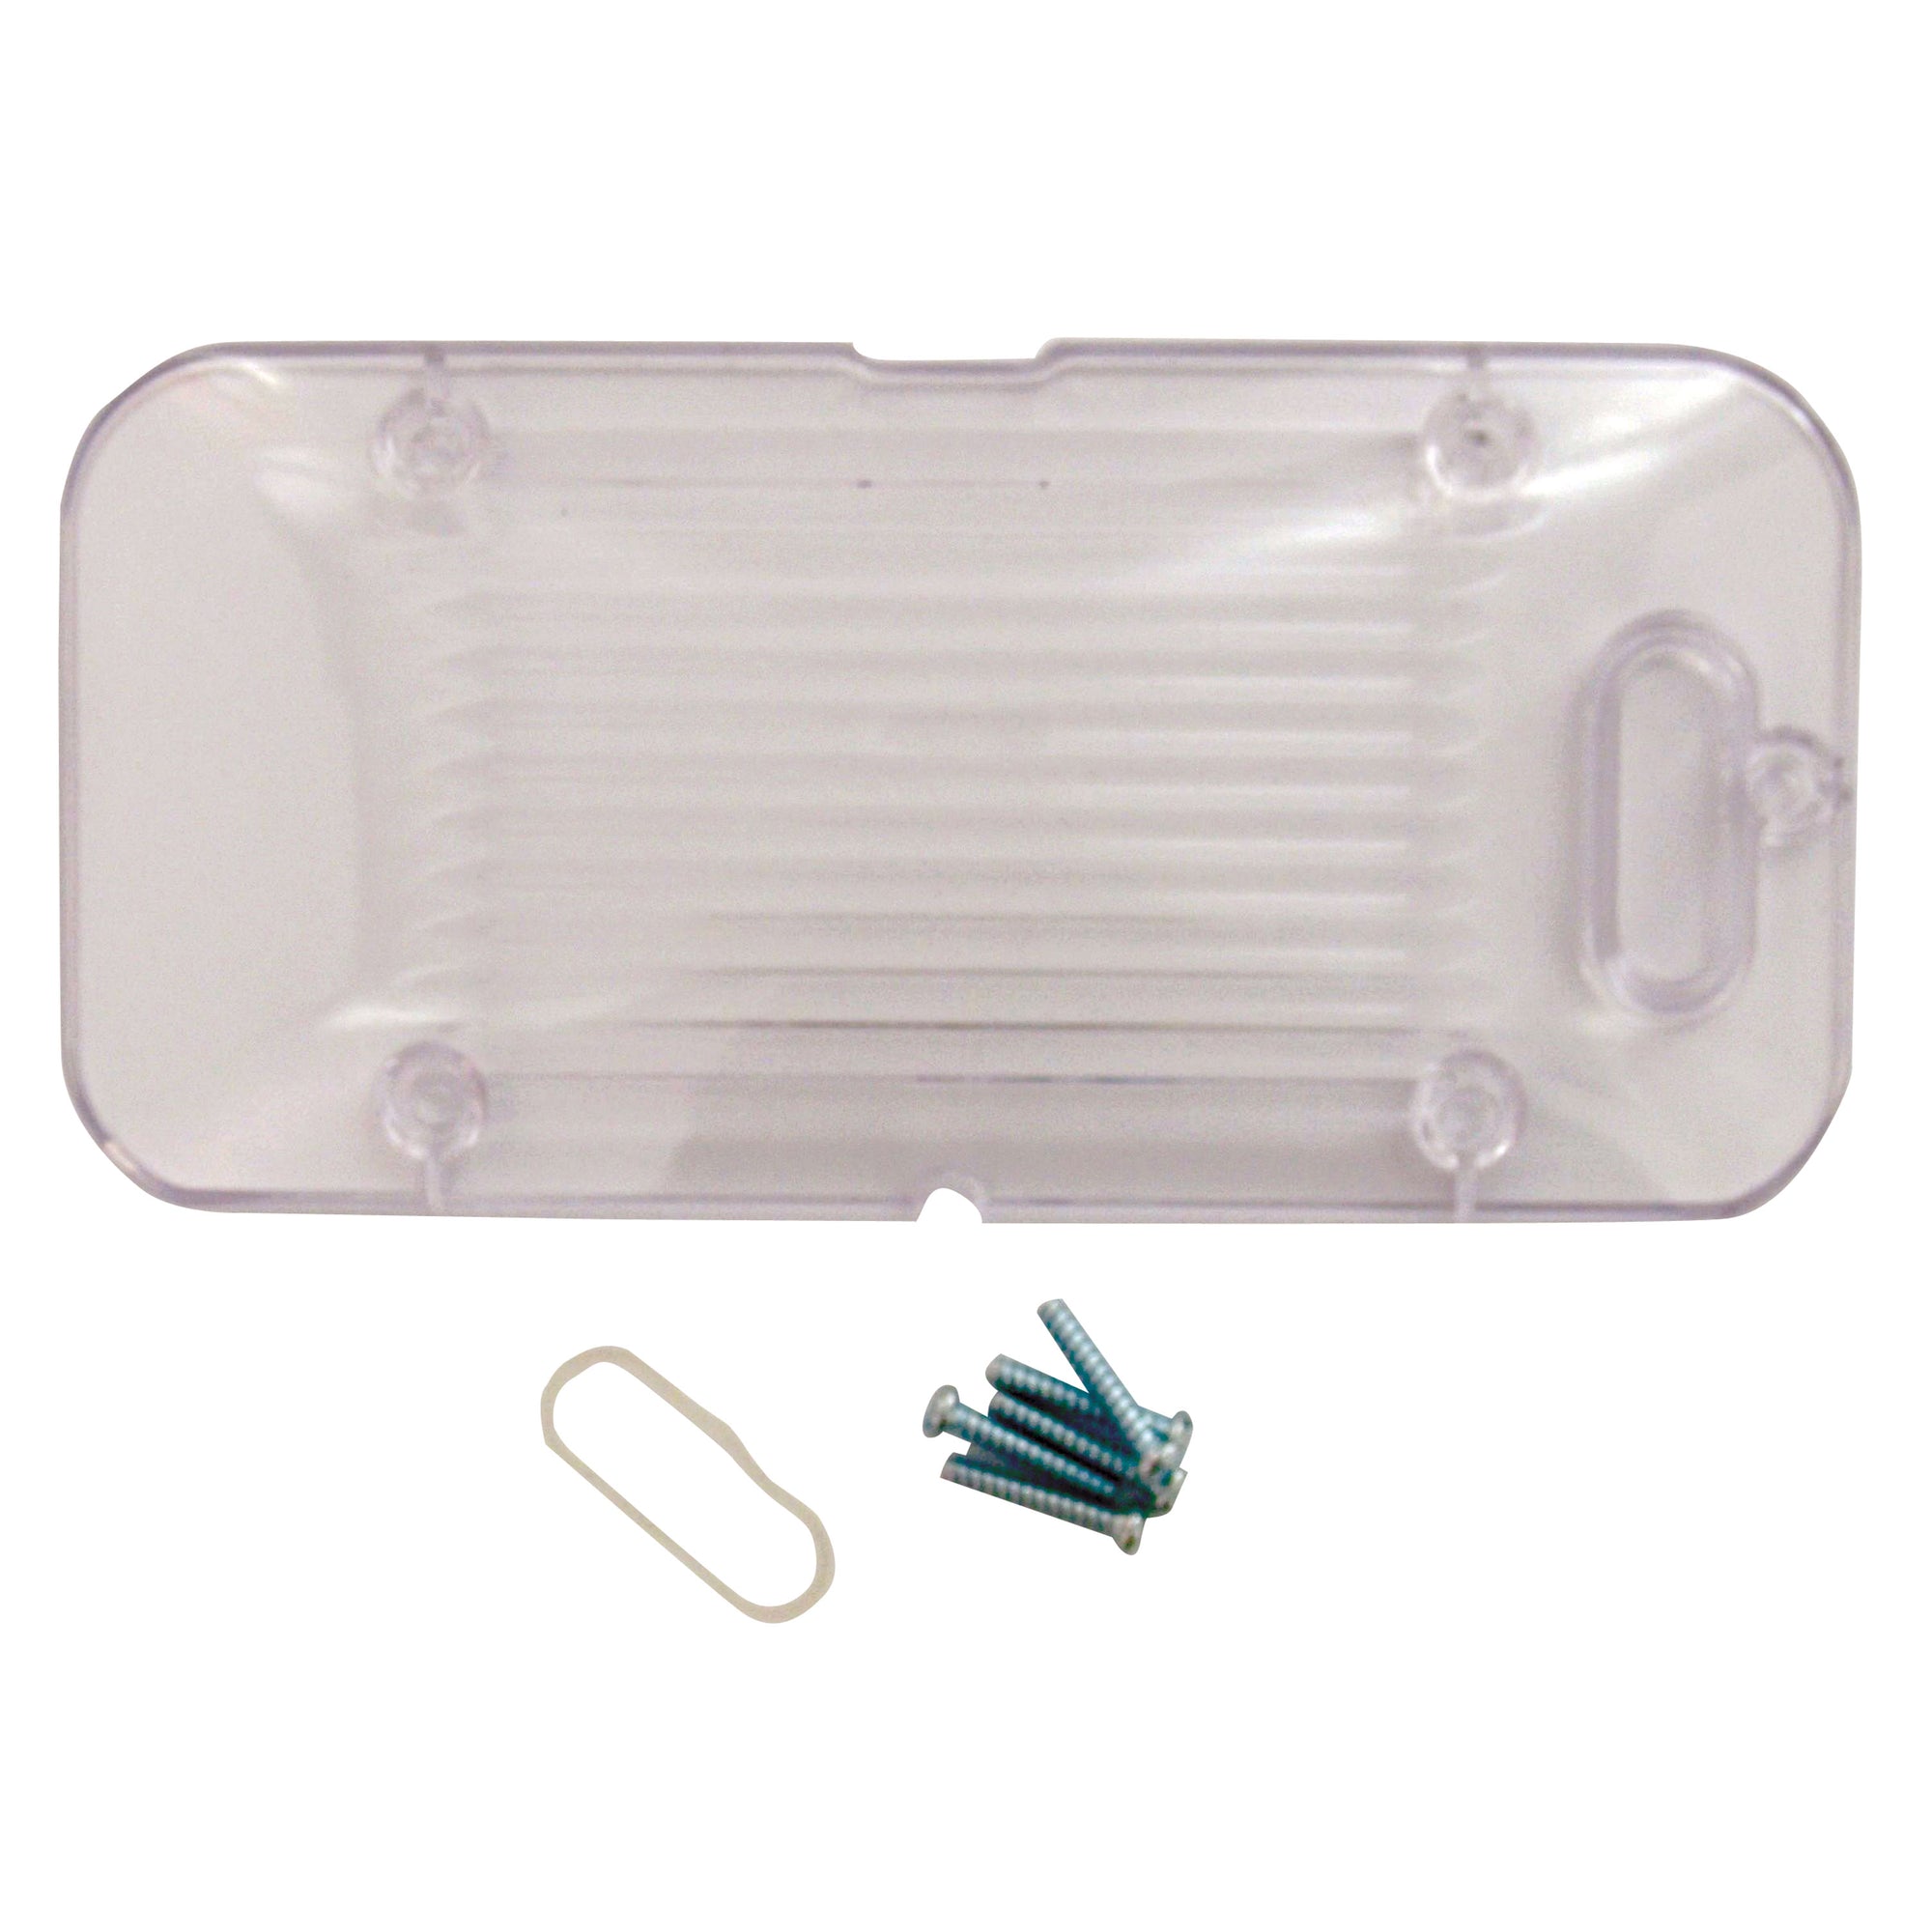 StarLights 016-RL1000 Clear Lens Kit for Motion Activated Lighting Fixtures